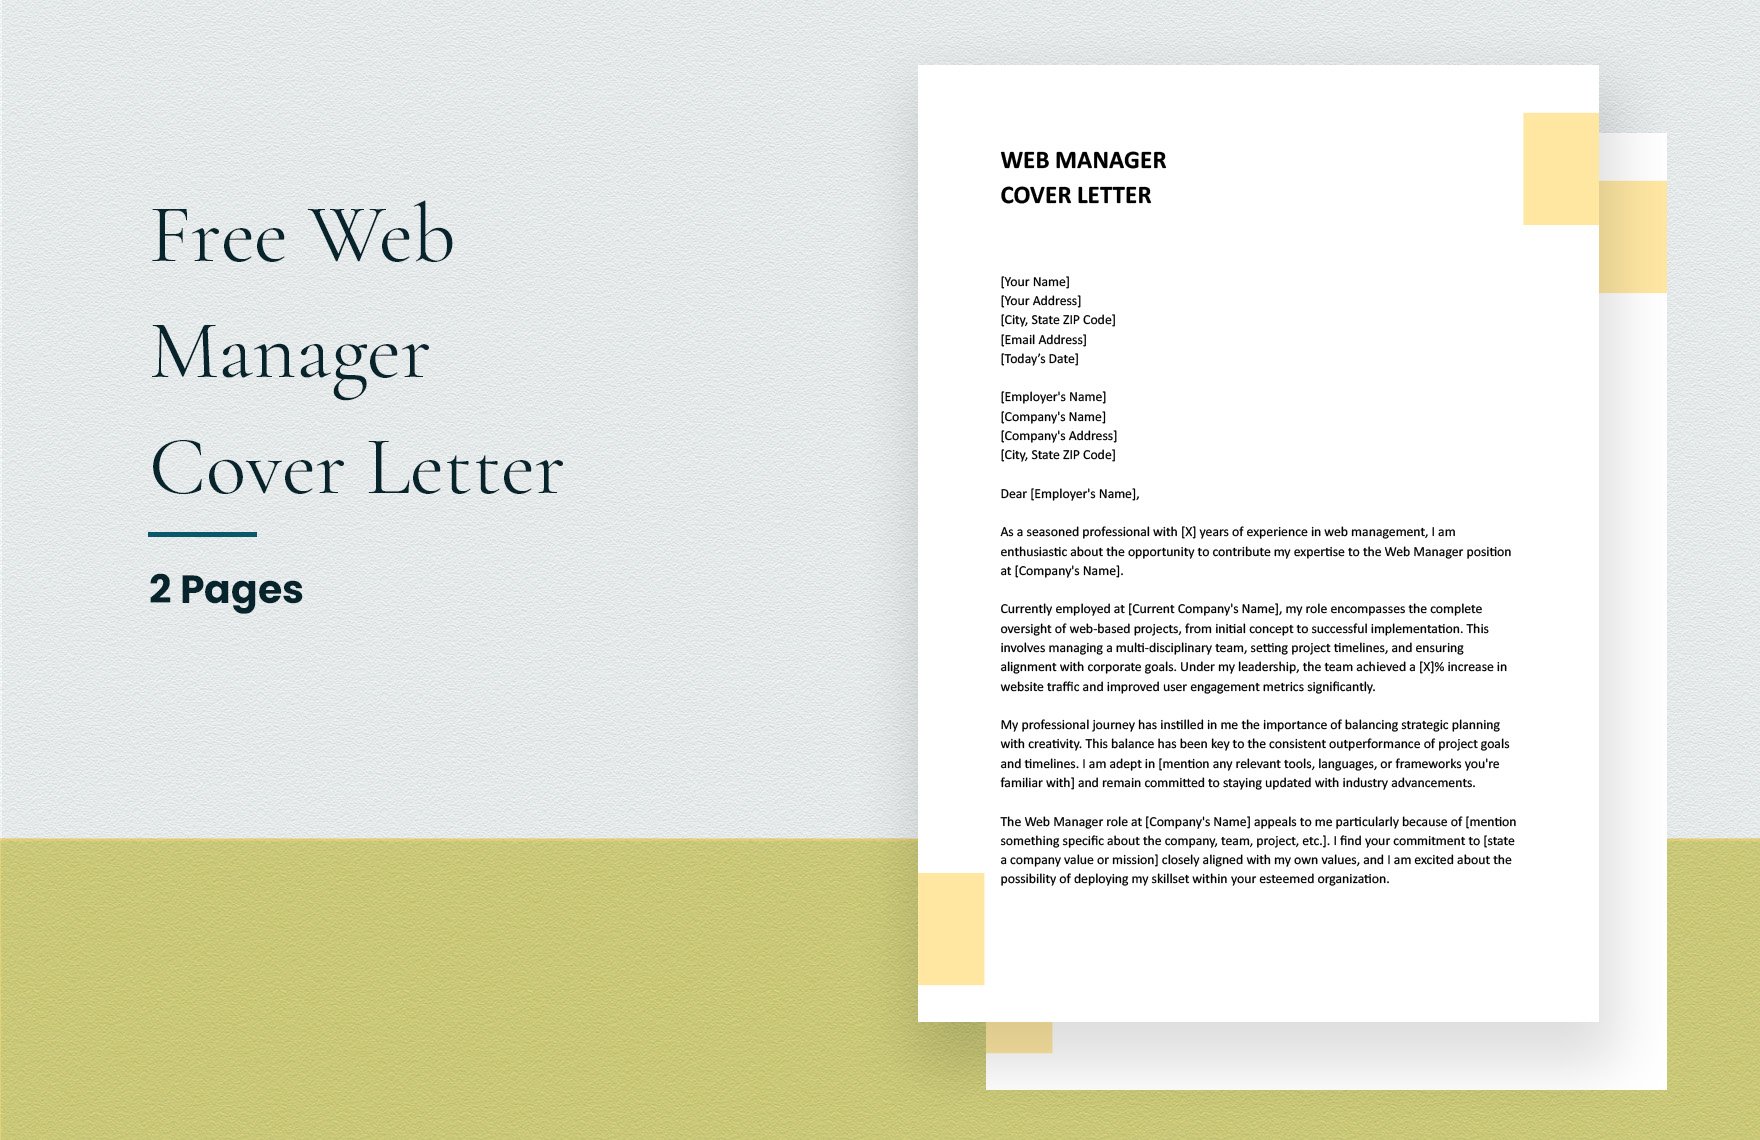 Web Manager Cover Letter